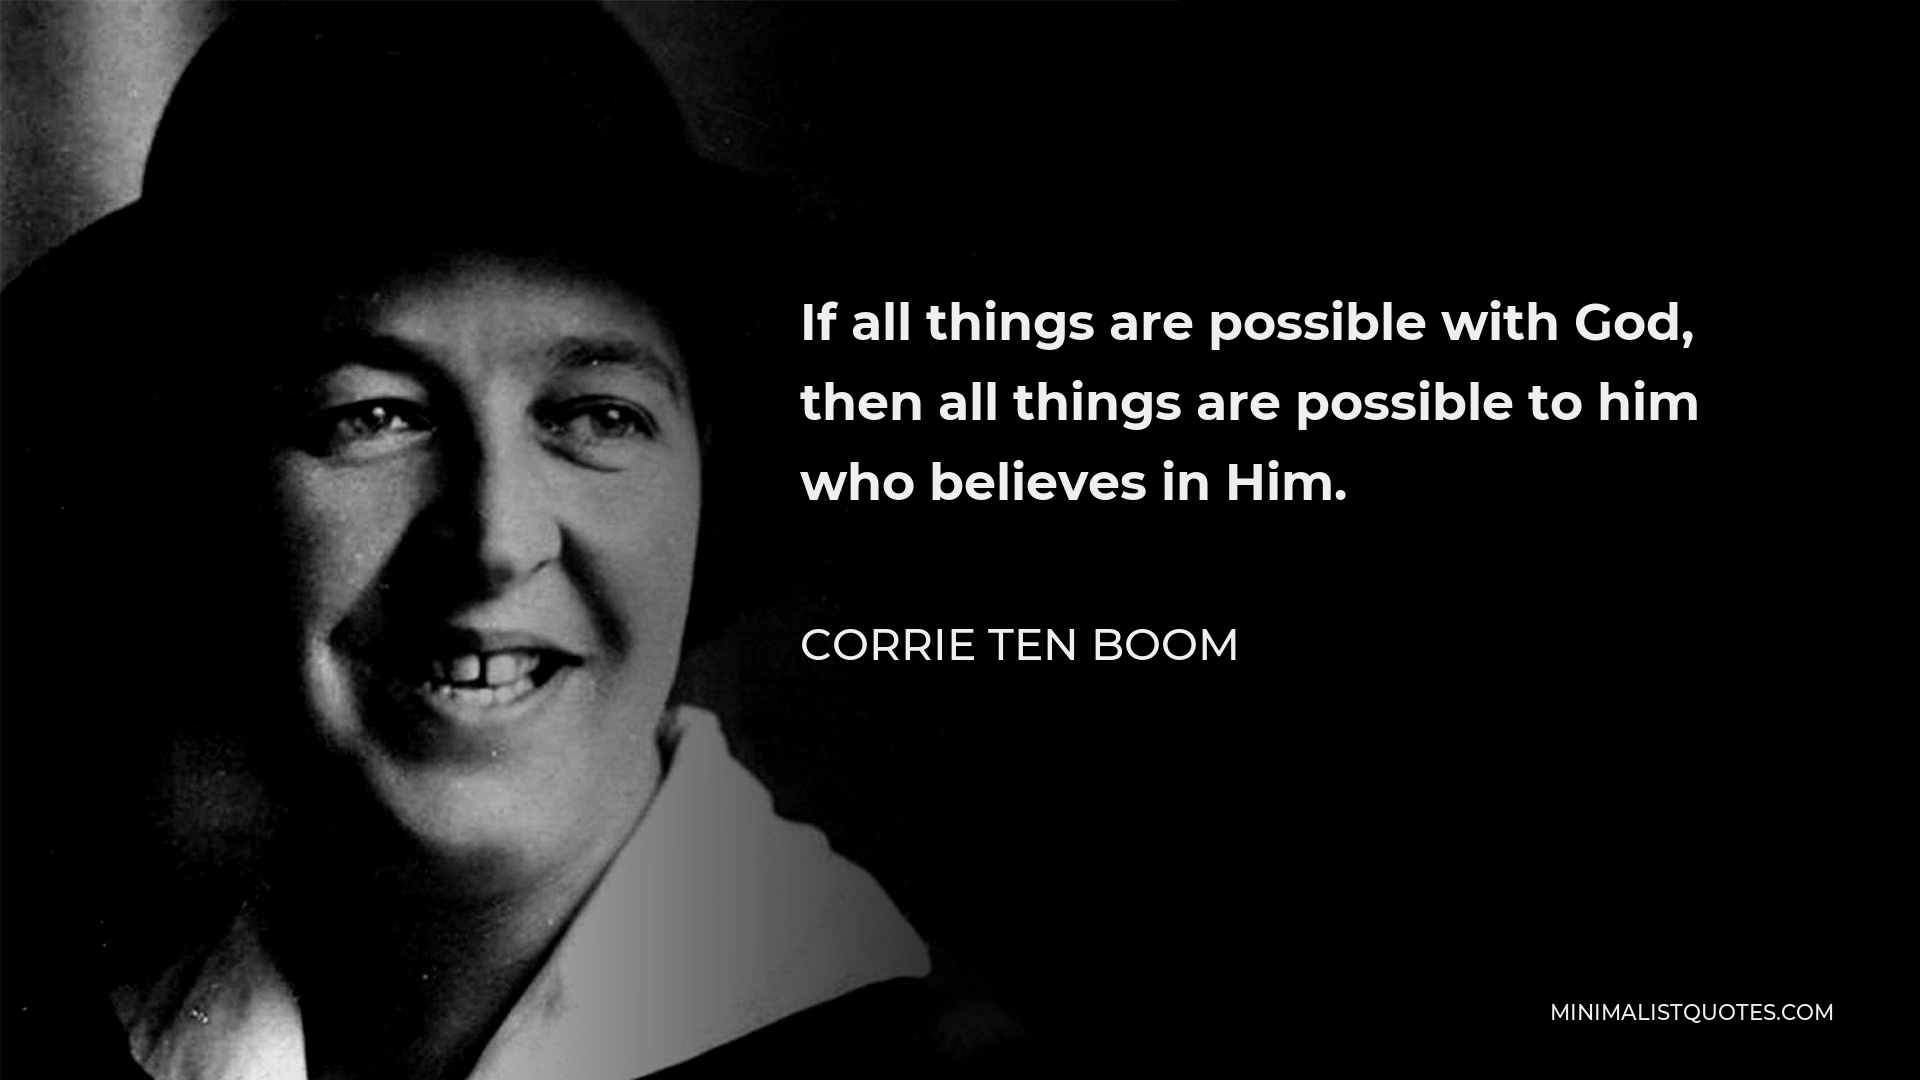 Corrie ten Boom Quote - If all things are possible with God, then all things are possible to him who believes in Him.